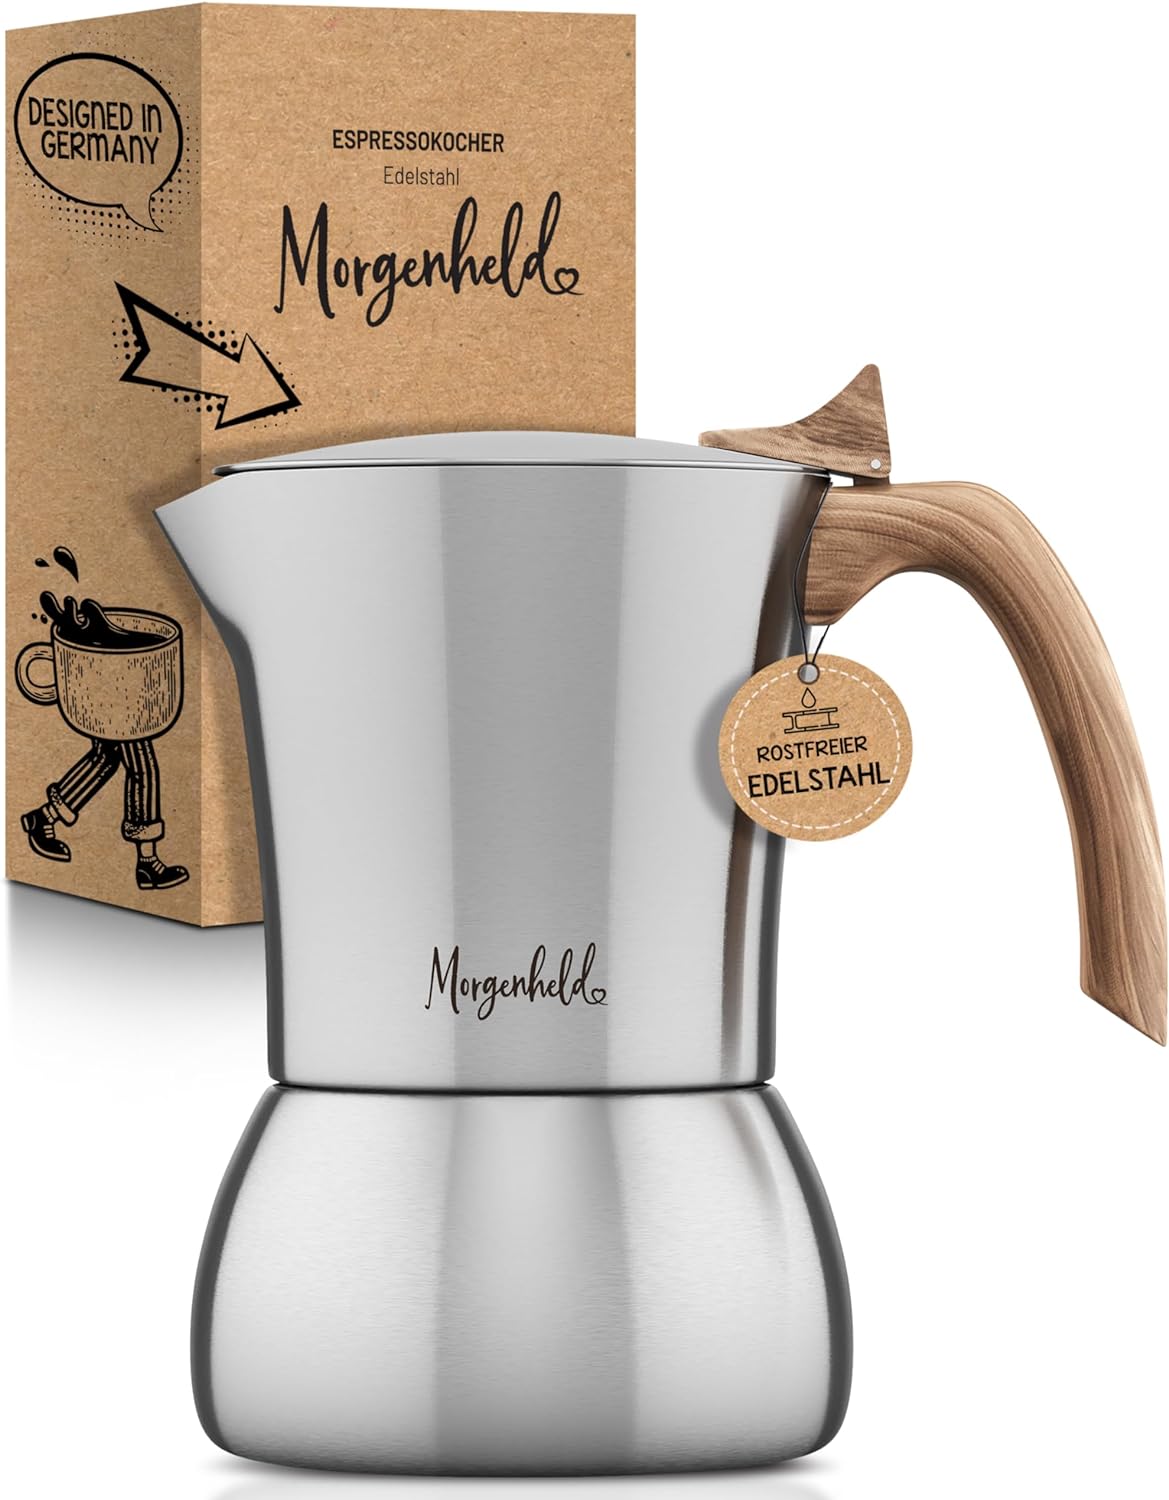 Morgenheld Premium Espresso Maker Induction for 6 Cups [300 ml] Made of Stainless Steel - Mocha Pot, Espresso Jug Suitible for All Types of Cookers - Dishwasher Safe